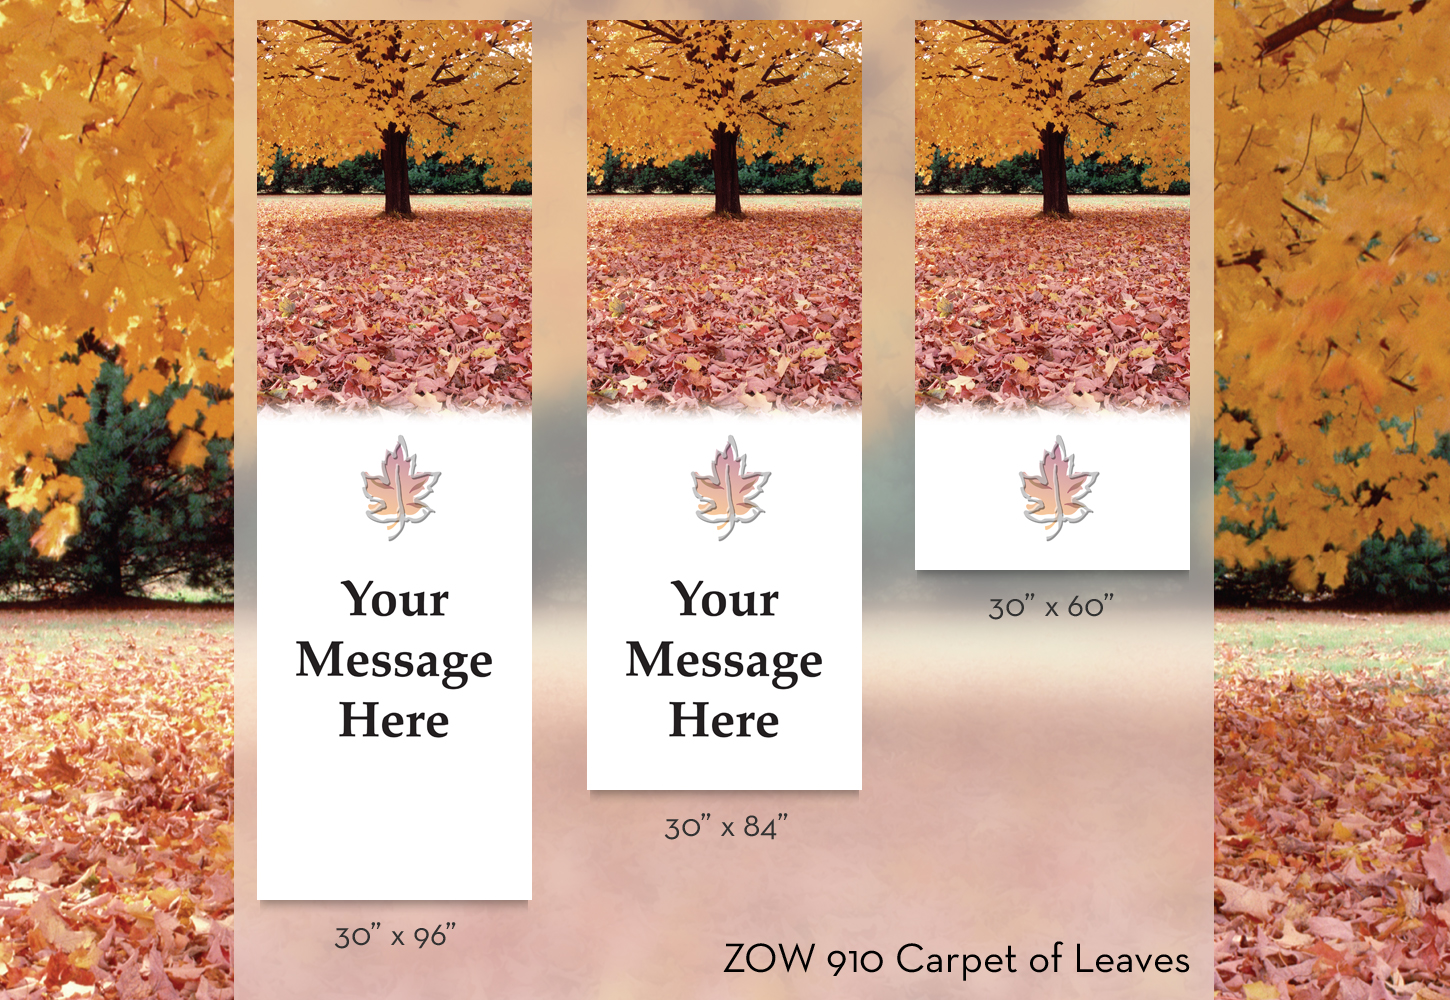 ZOW 910 Carpet of Leaves